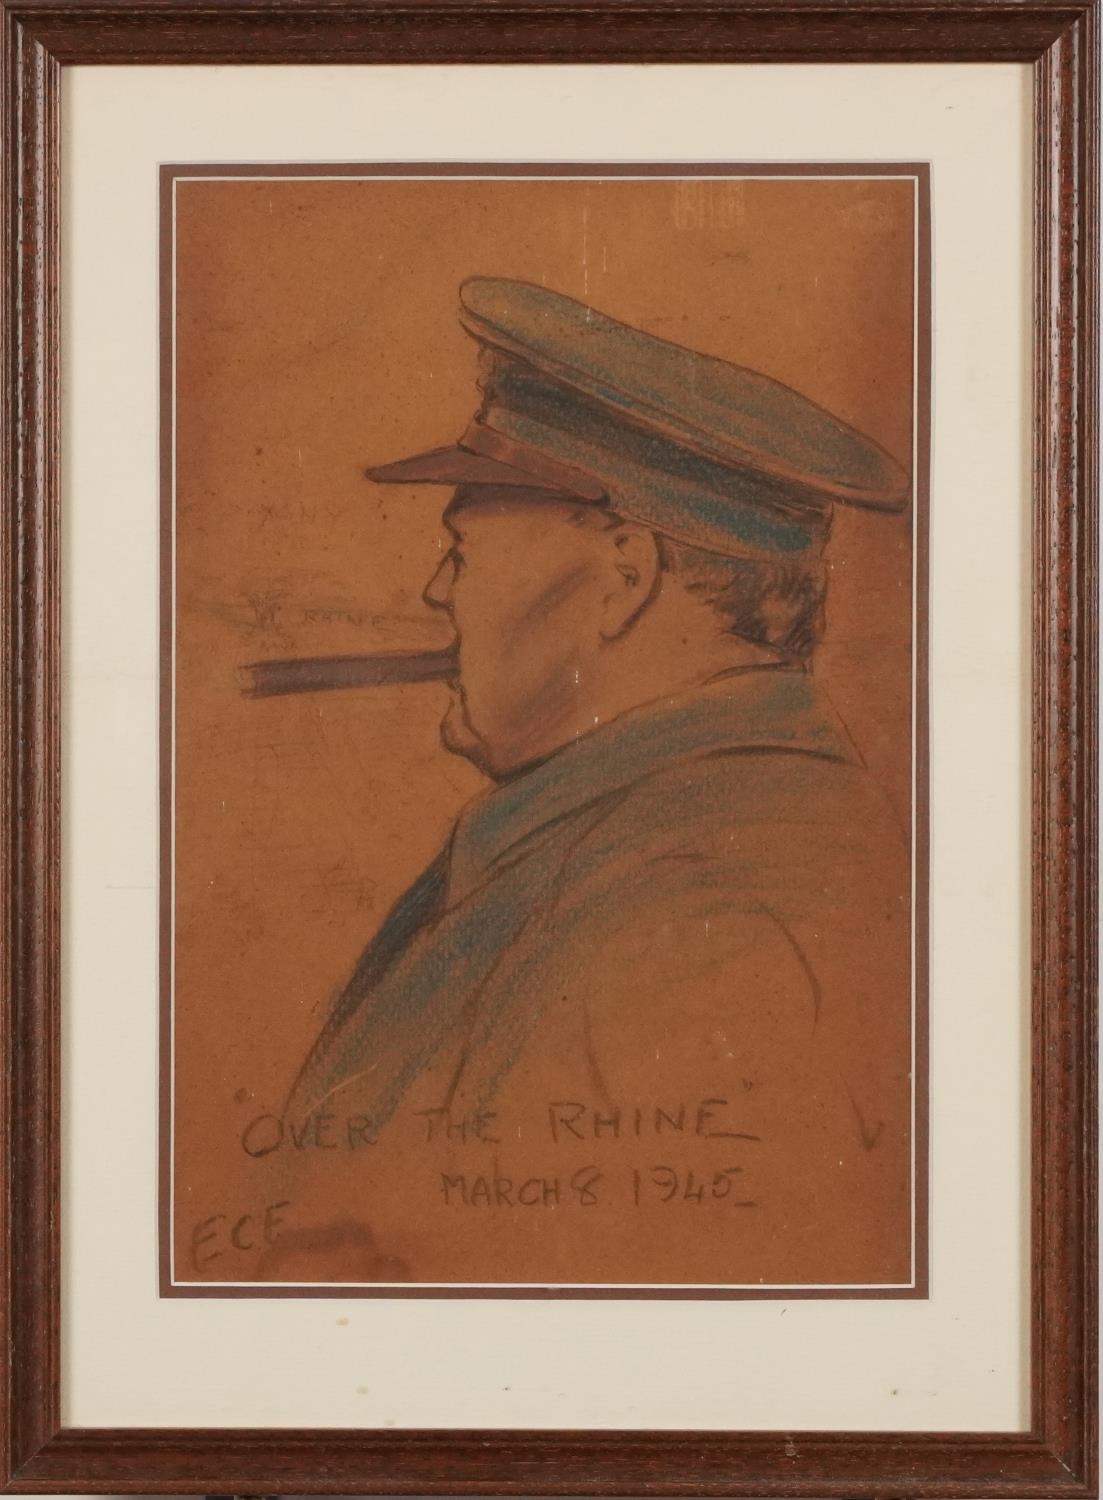 E C F - Winston Churchill, Over the Rhine, March 8th 1945, charcoal and crayon sketch, mounted and - Image 2 of 5